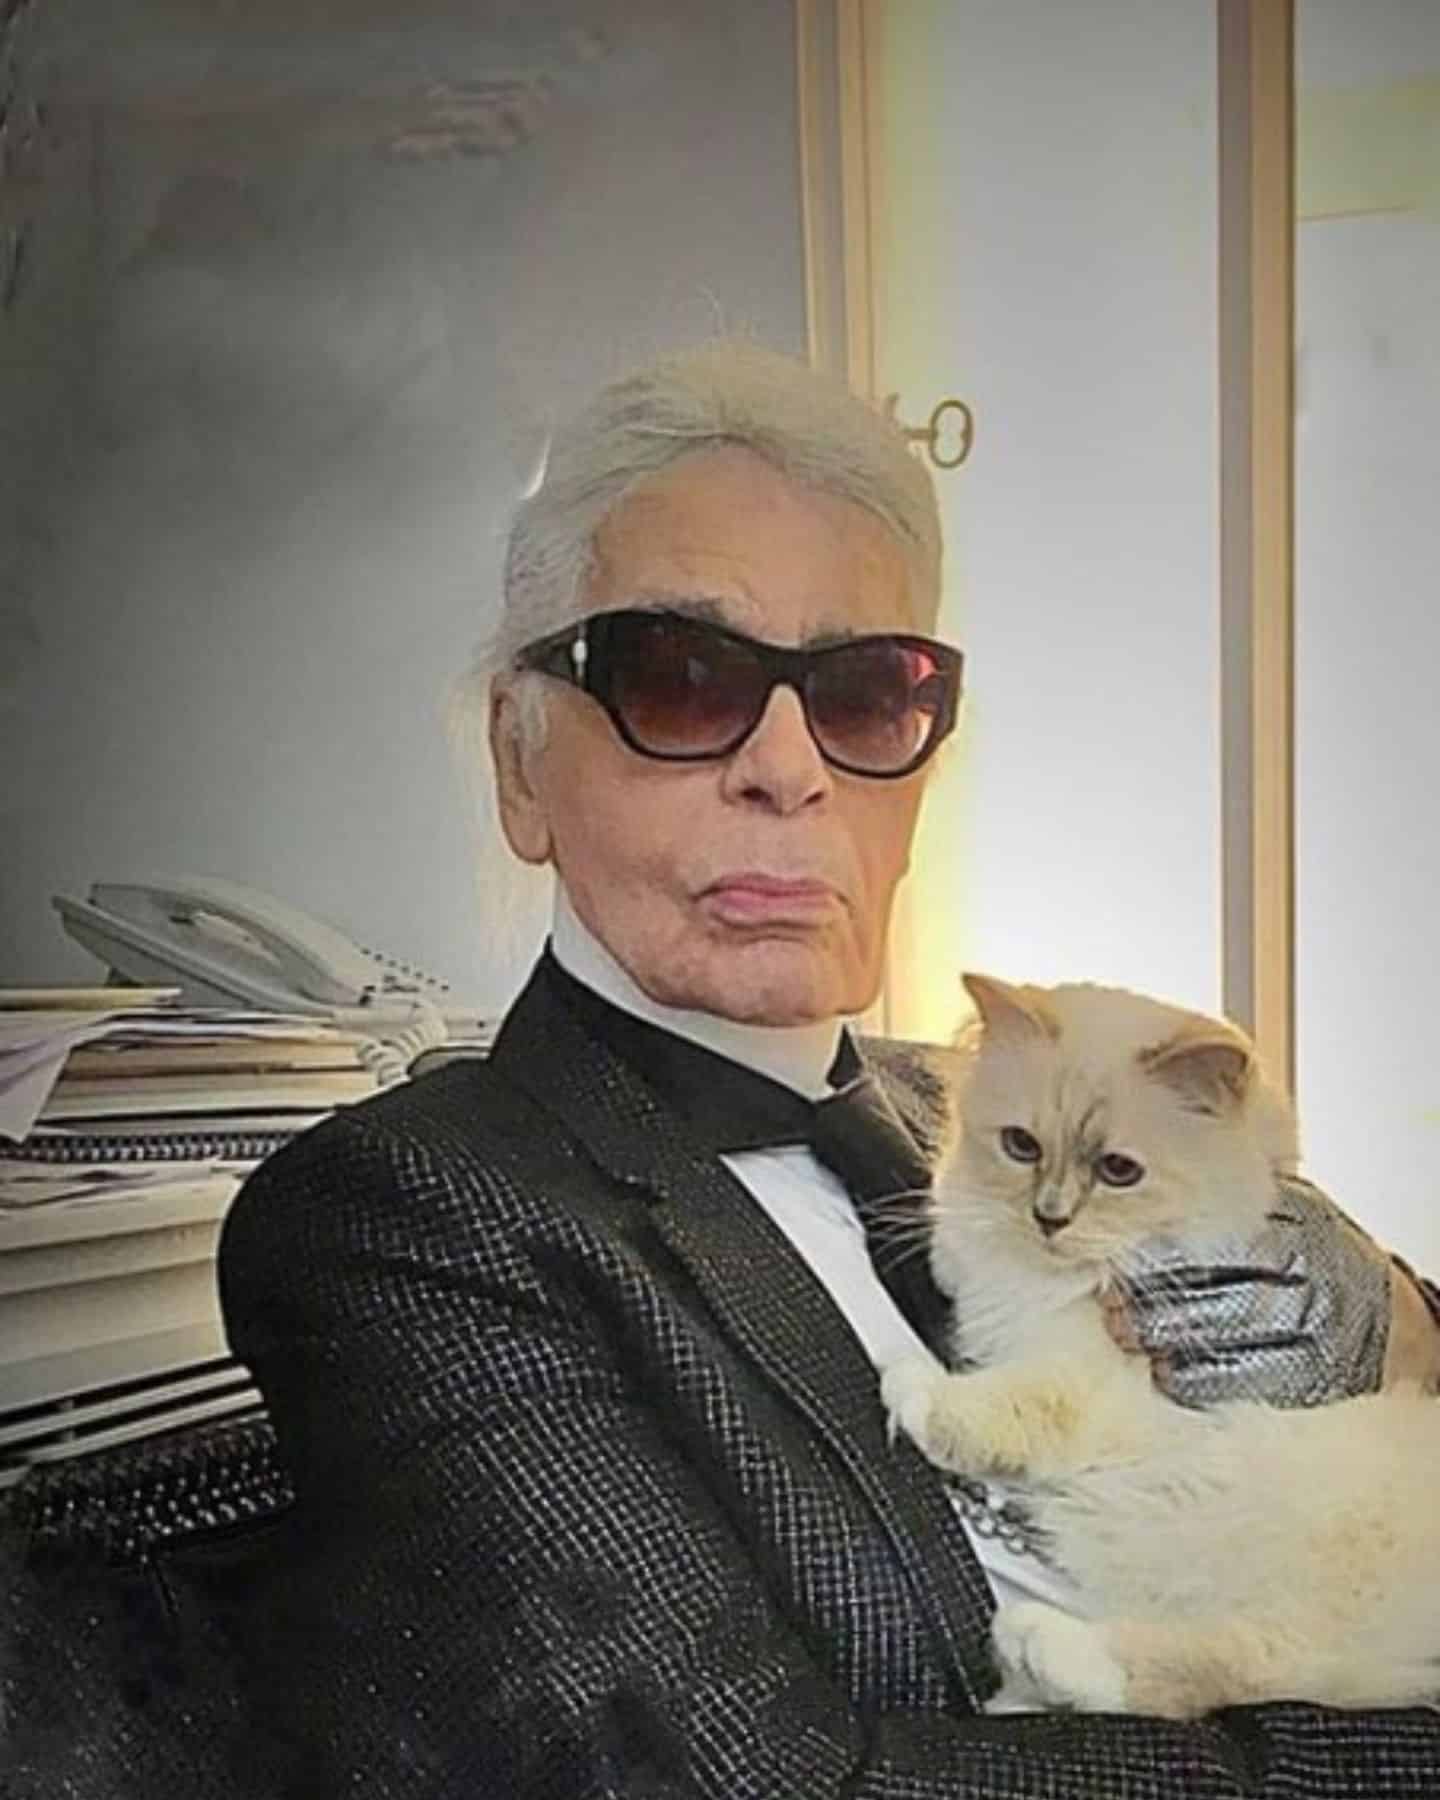 Karl Lagerfeld holding his cat